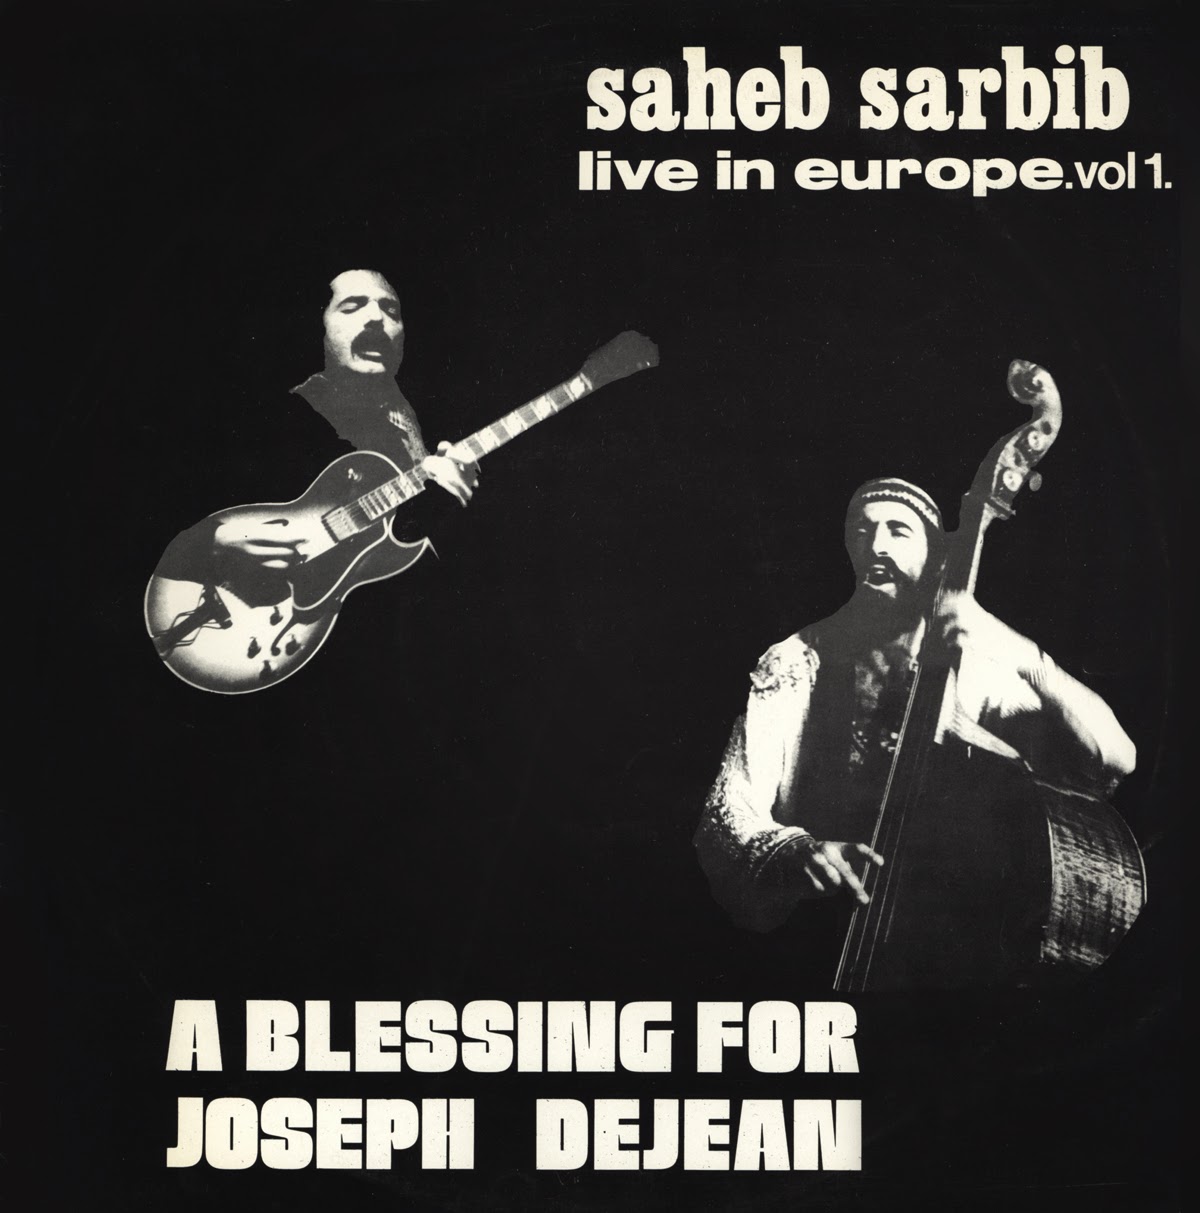 SAHEB SARBIB - Live In Europe Vol 1. A Blessing For Joseph Dejean cover 